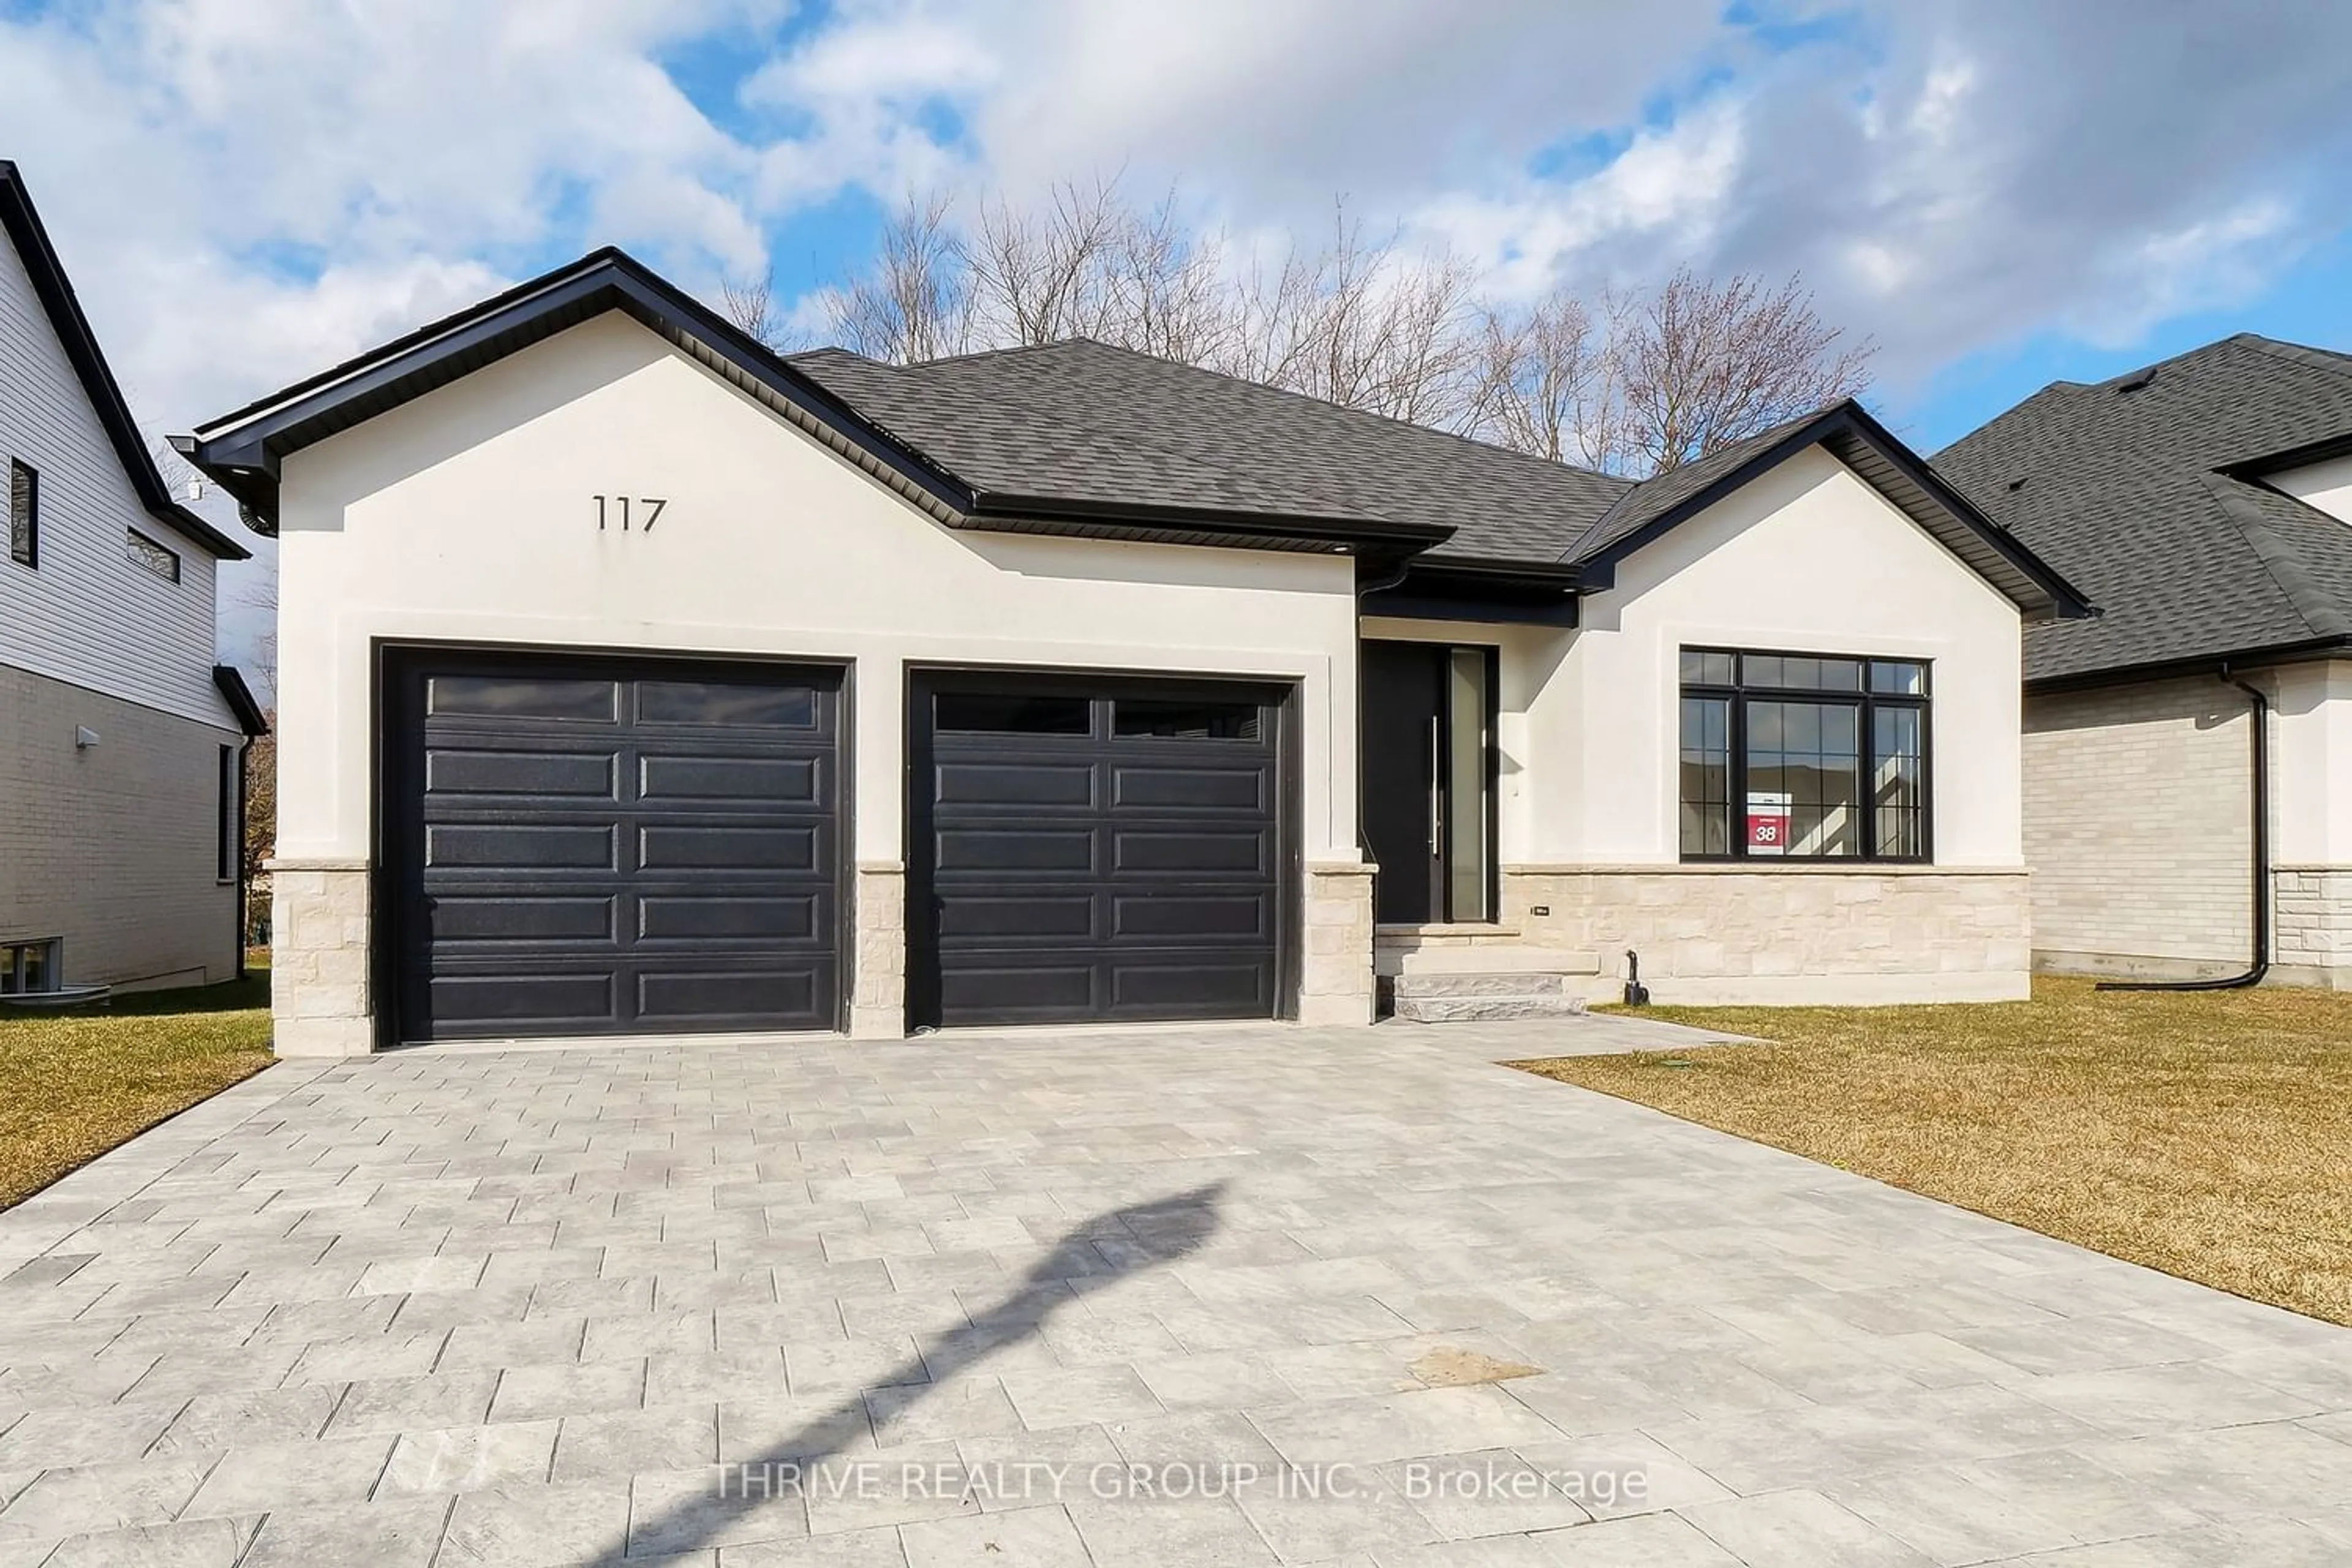 Home with brick exterior material for 117 Aspen Circ, Thames Centre Ontario N0M 2A4